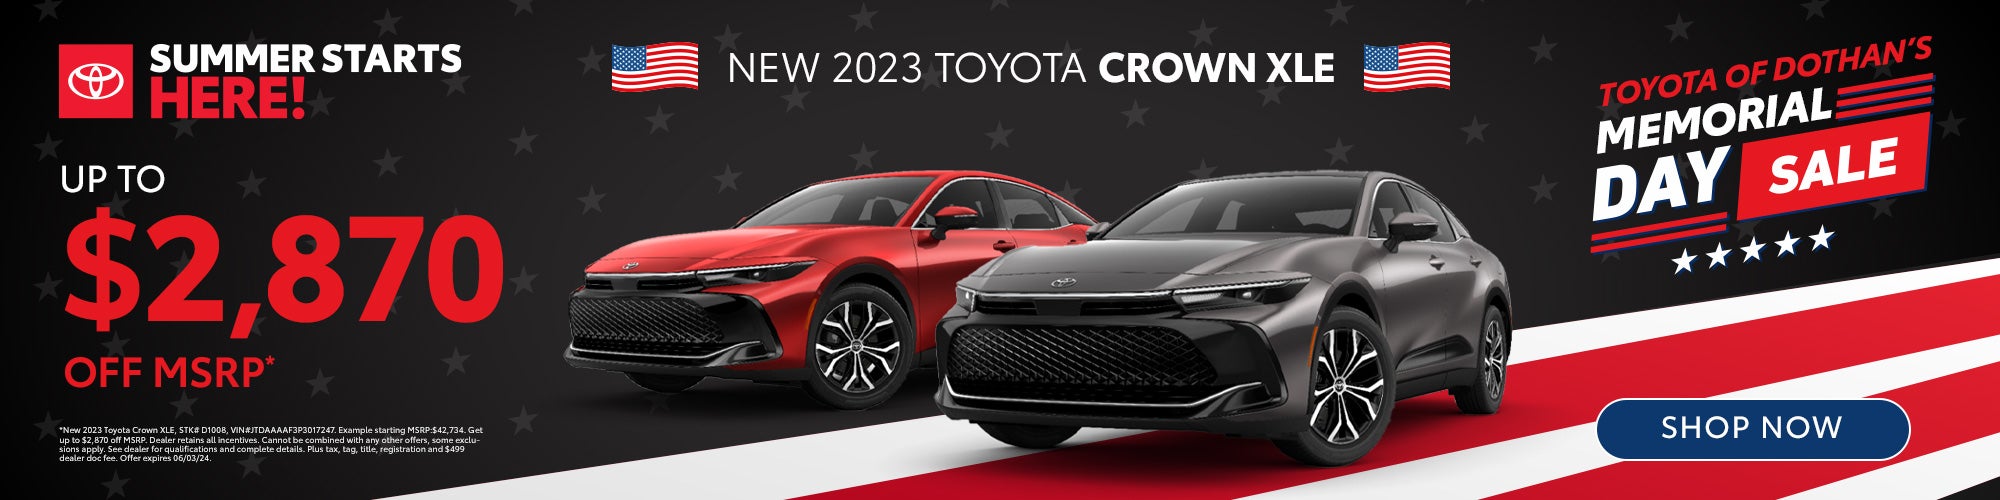 New 2023 Toyota Crown XLE